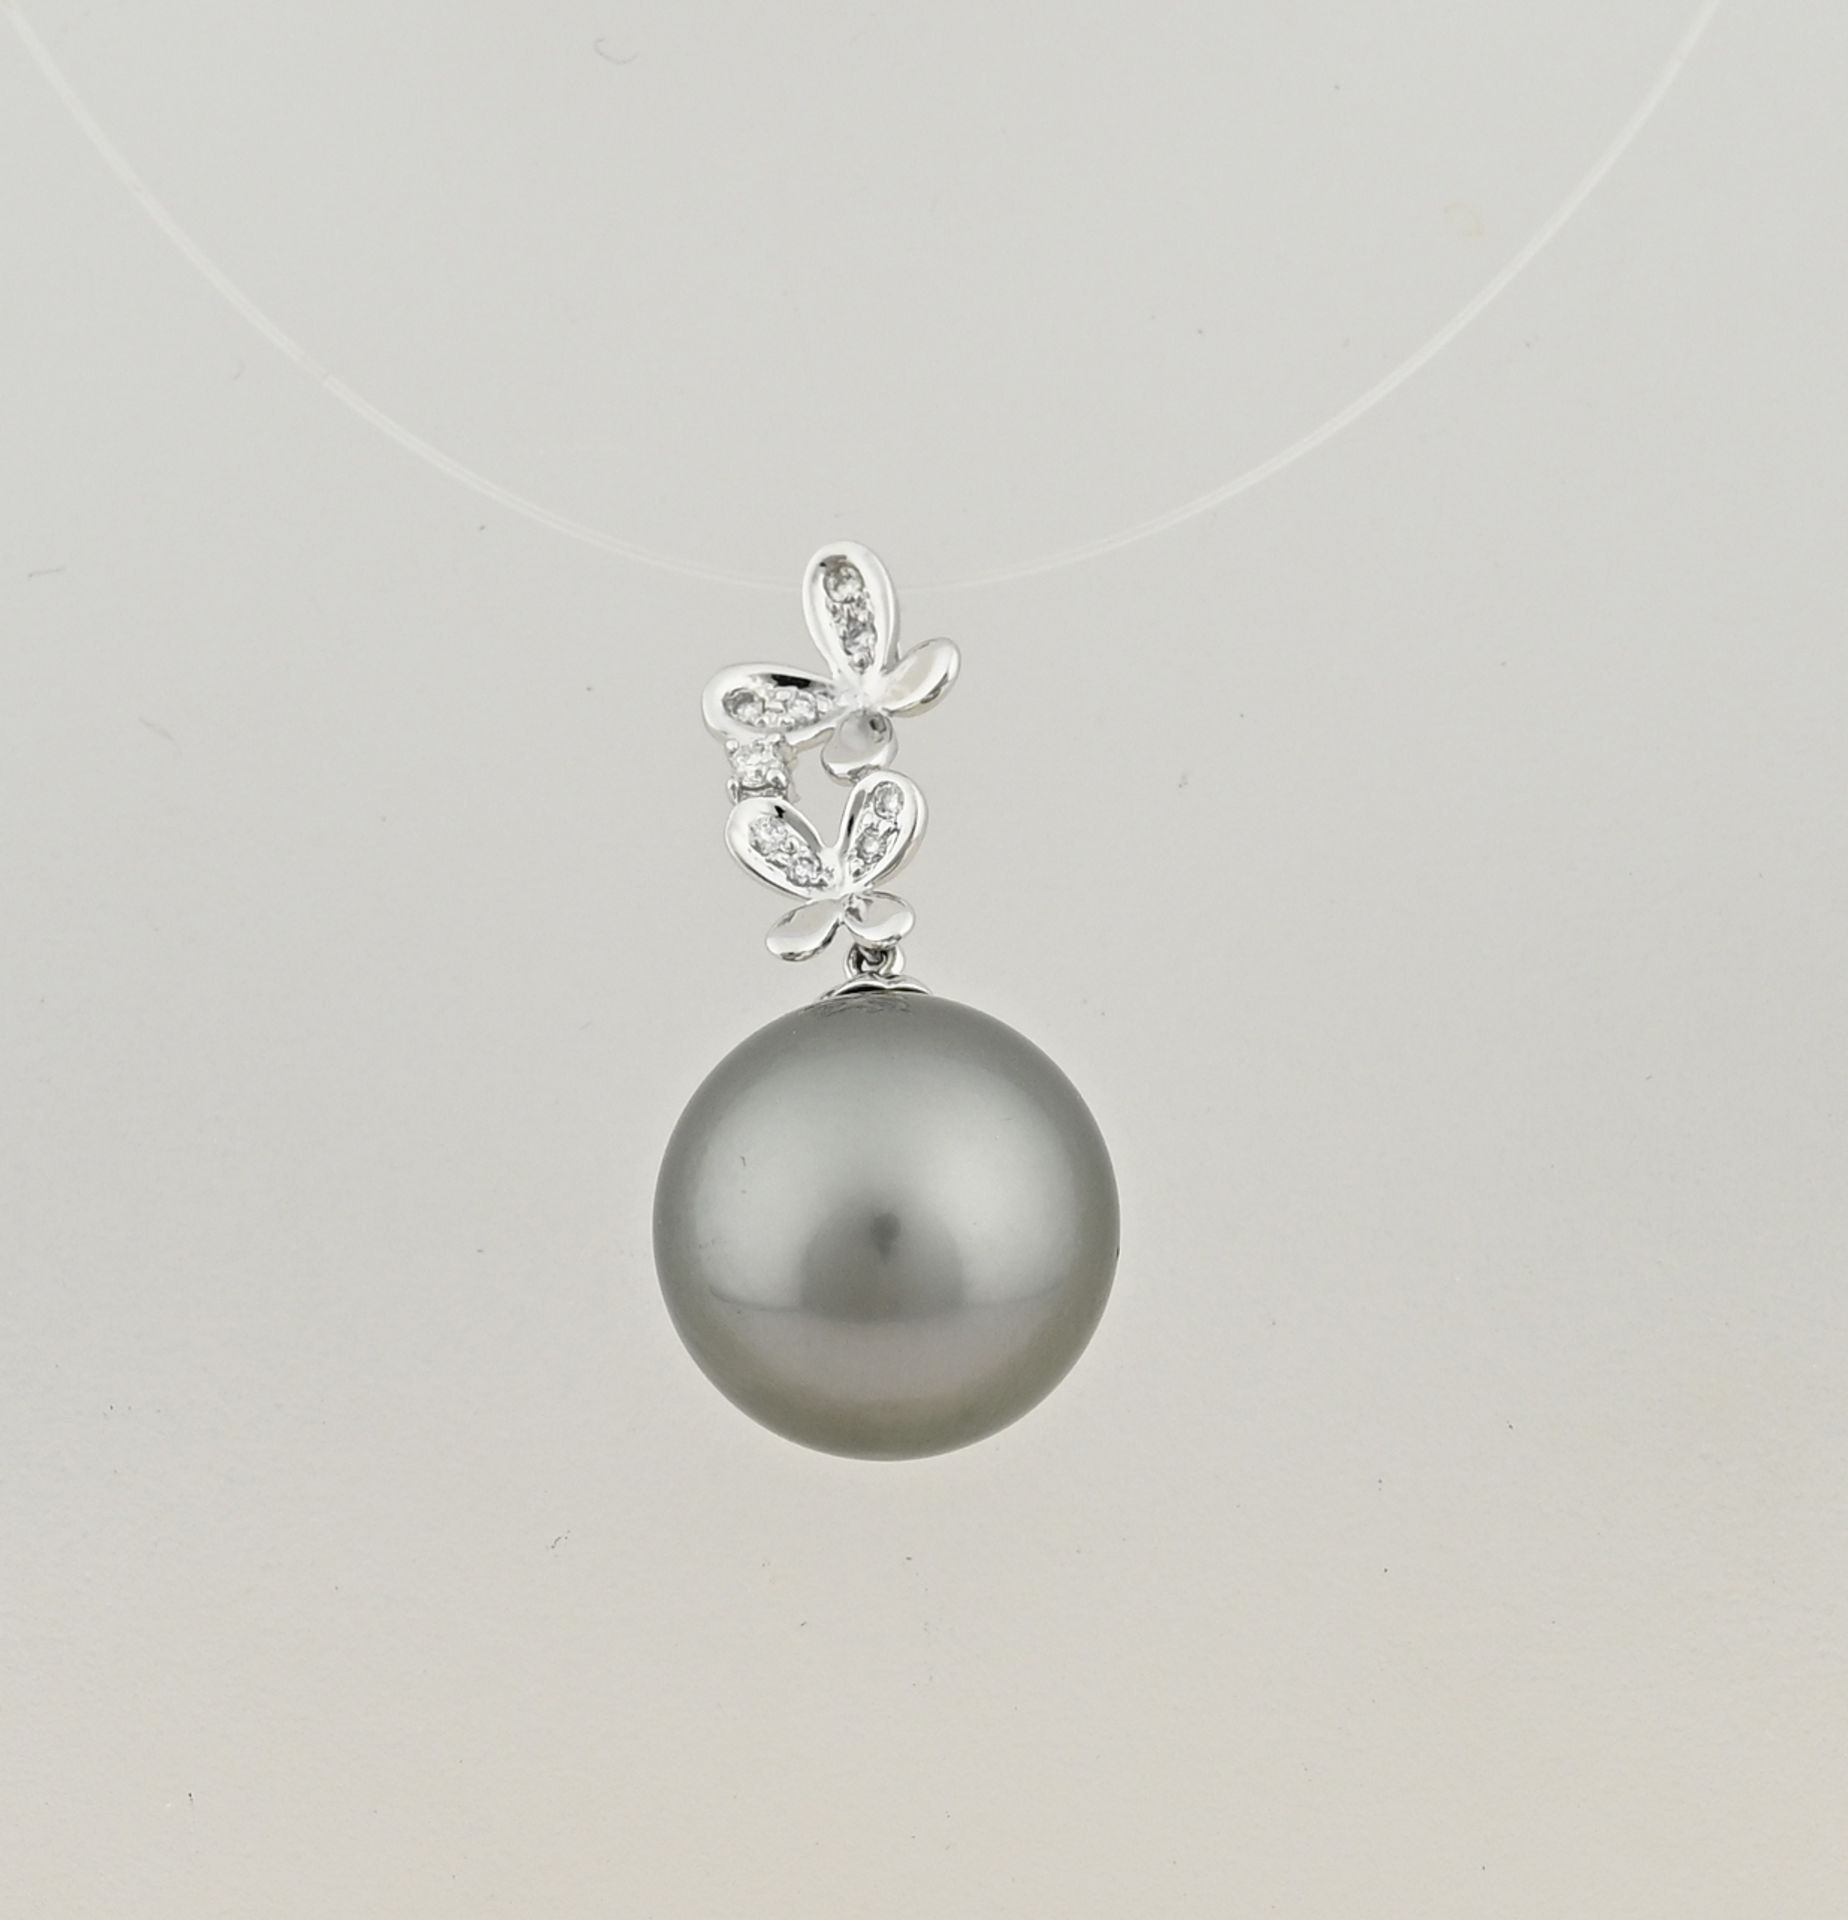 White gold pendant with pearl and diamond